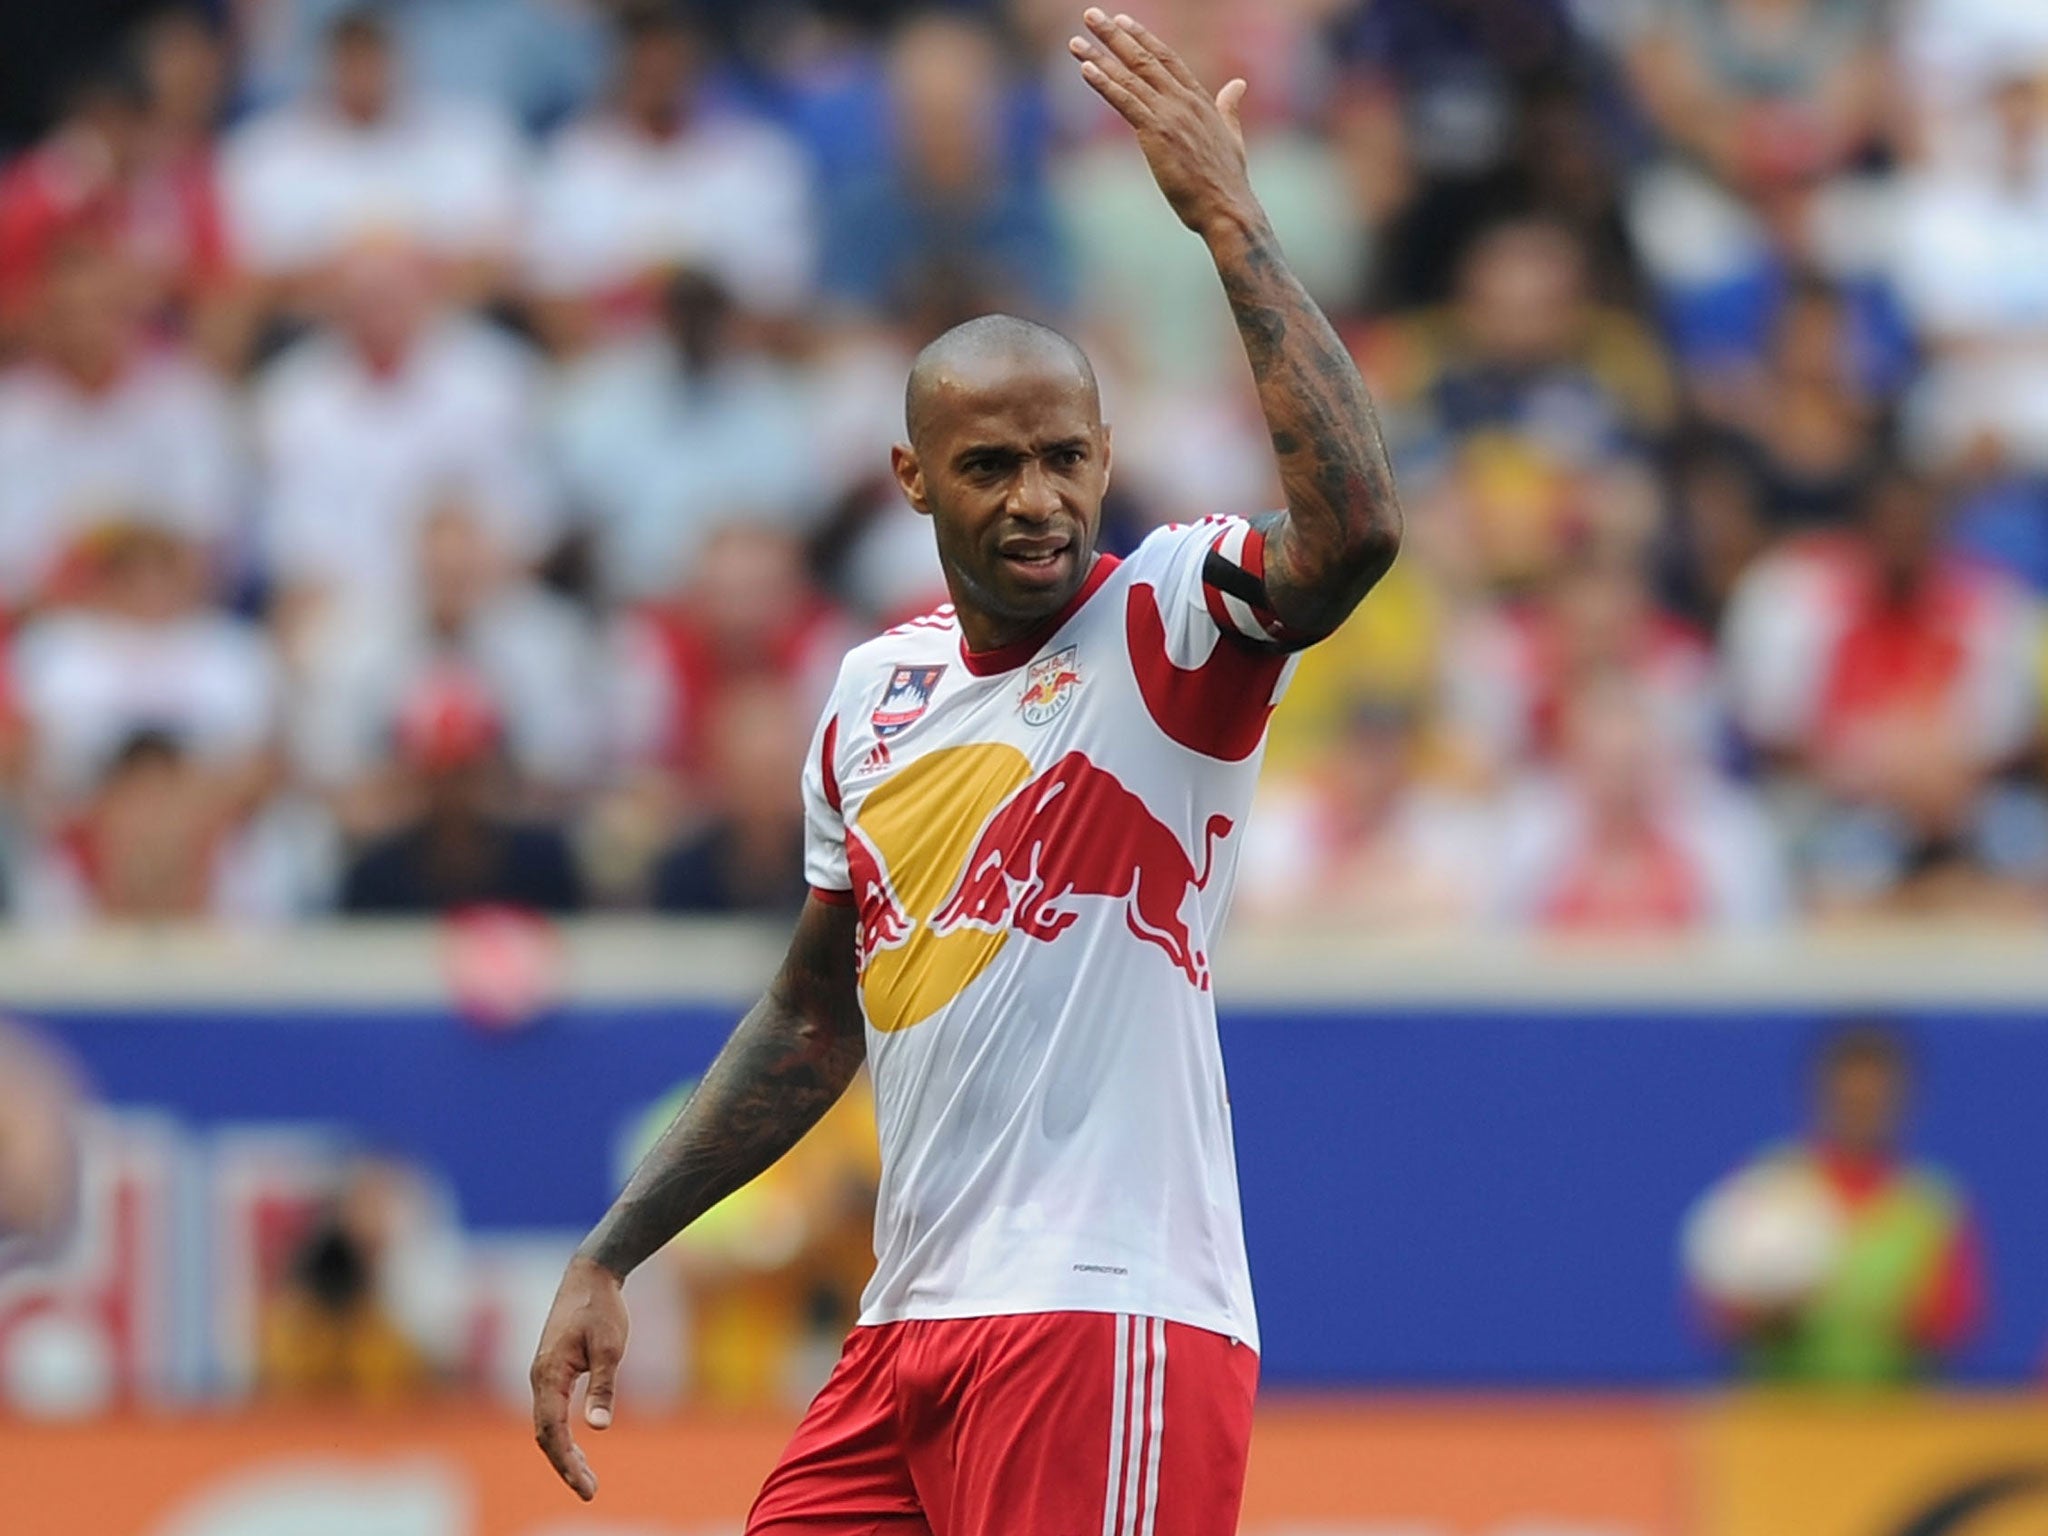 Thierry Henry in action for the New York Red Bulls